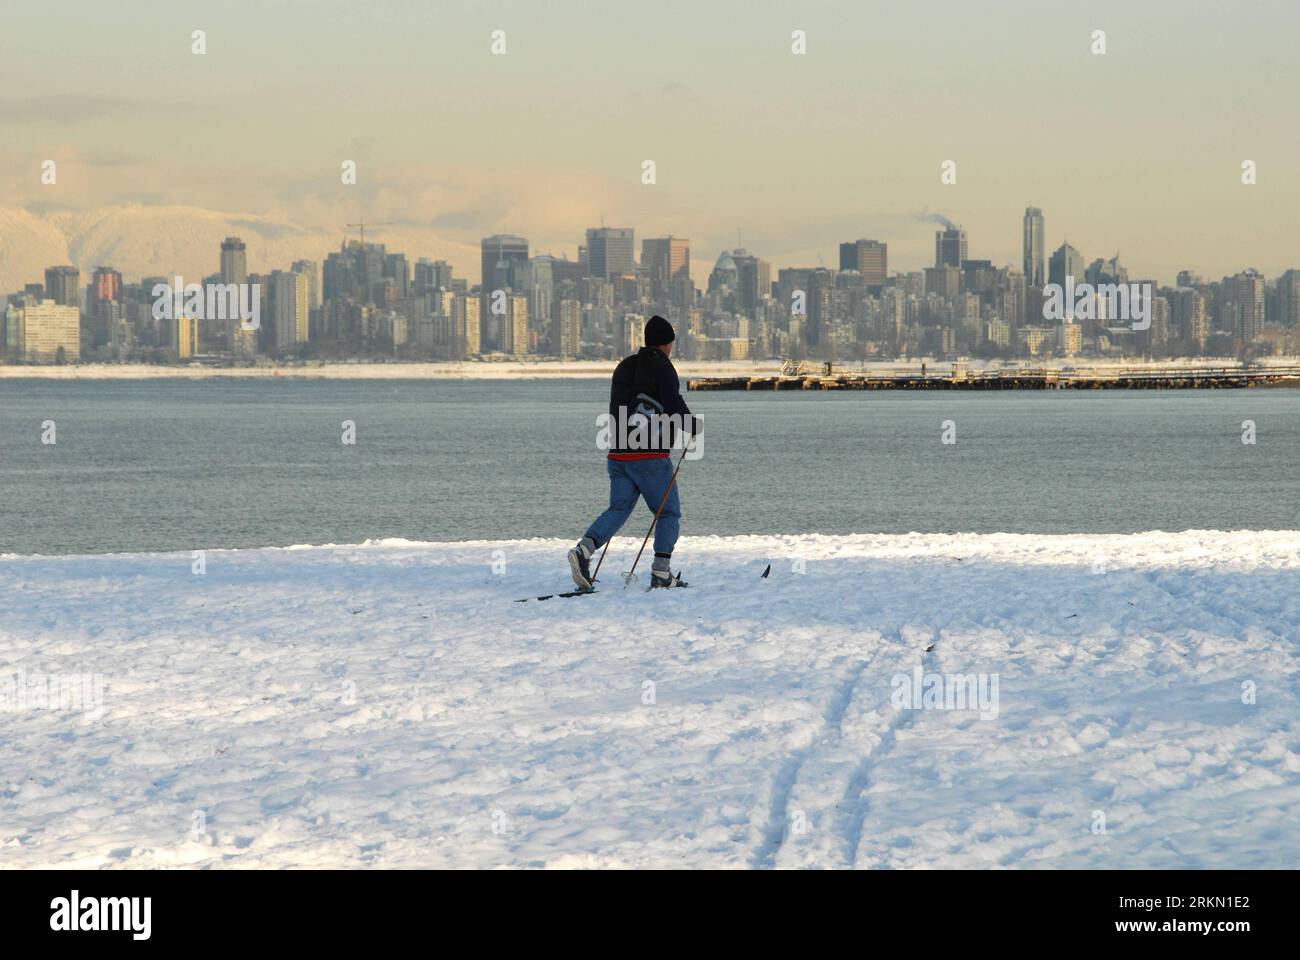 Bildnummer: 56905045  Datum: 17.01.2012  Copyright: imago/Xinhua (120118) -- VANCOUVER, Jan. 18, 2011 (Xinhua) -- A man skis at the snow covered Jericho Beach in Vancouver, Jan. 17, 2012. Environment Canada has issued a snowfall warning for Metro Vancouver, with estimated 20cm of fresh snow to fall on Vancouver overnight. Wind chill caused by a blast of continental arctic air could cause the temperature to drop to -20 degree centigrade in land of Howe Sound in the next few days. (Xinhua/Sergei Bachlakov) (zyw) CANADA-VANCOUVER-WEATHER PUBLICATIONxNOTxINxCHN Gesellschaft Winter Jahreszeit xns x Stock Photo